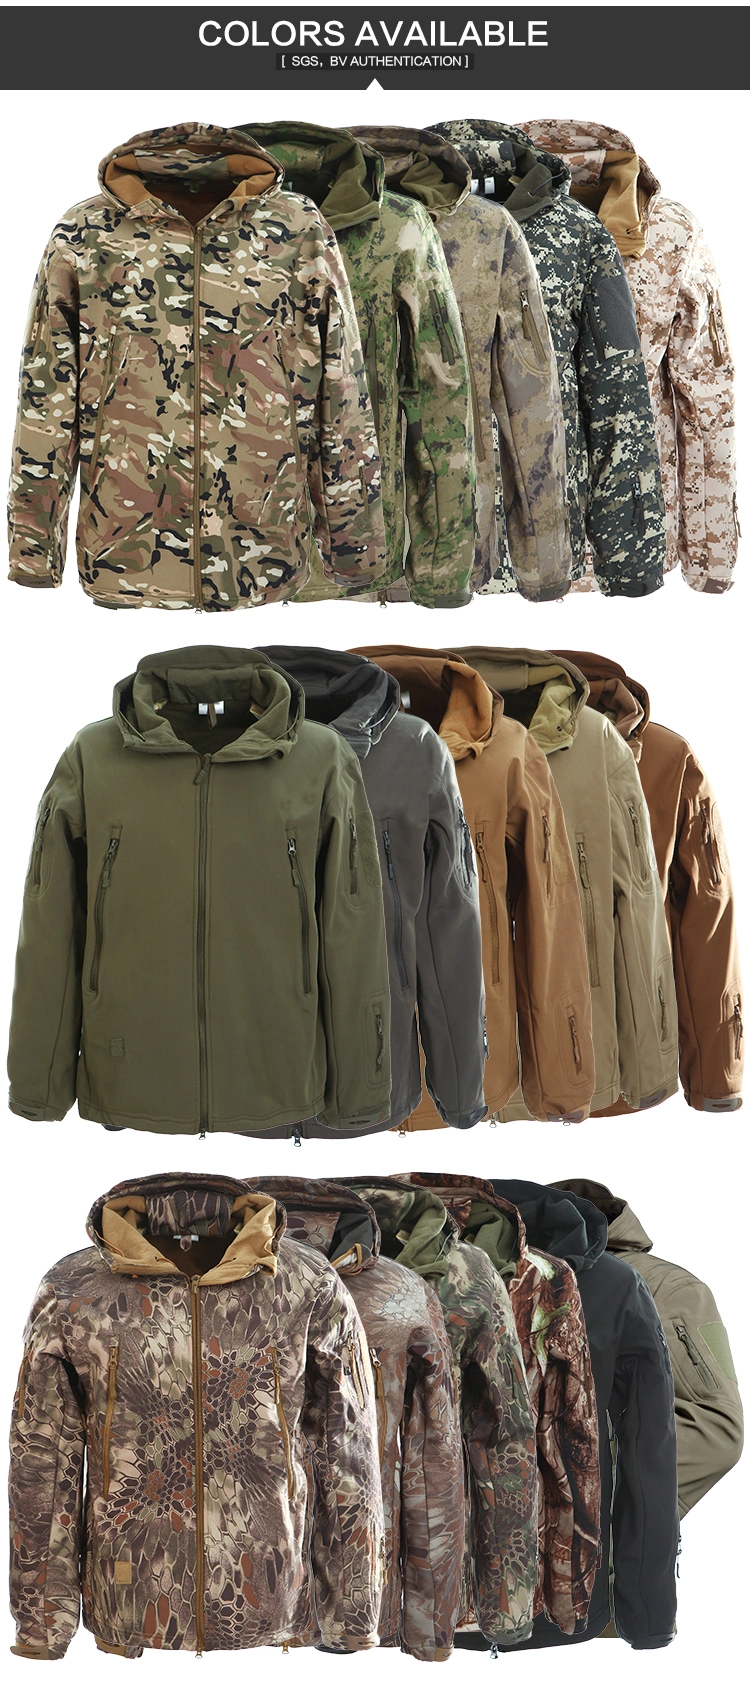 Army Surplus Waterproof and Breathable Sharkskin Softshell Jacket with Fleece Lining Brown Outdoor Jacket